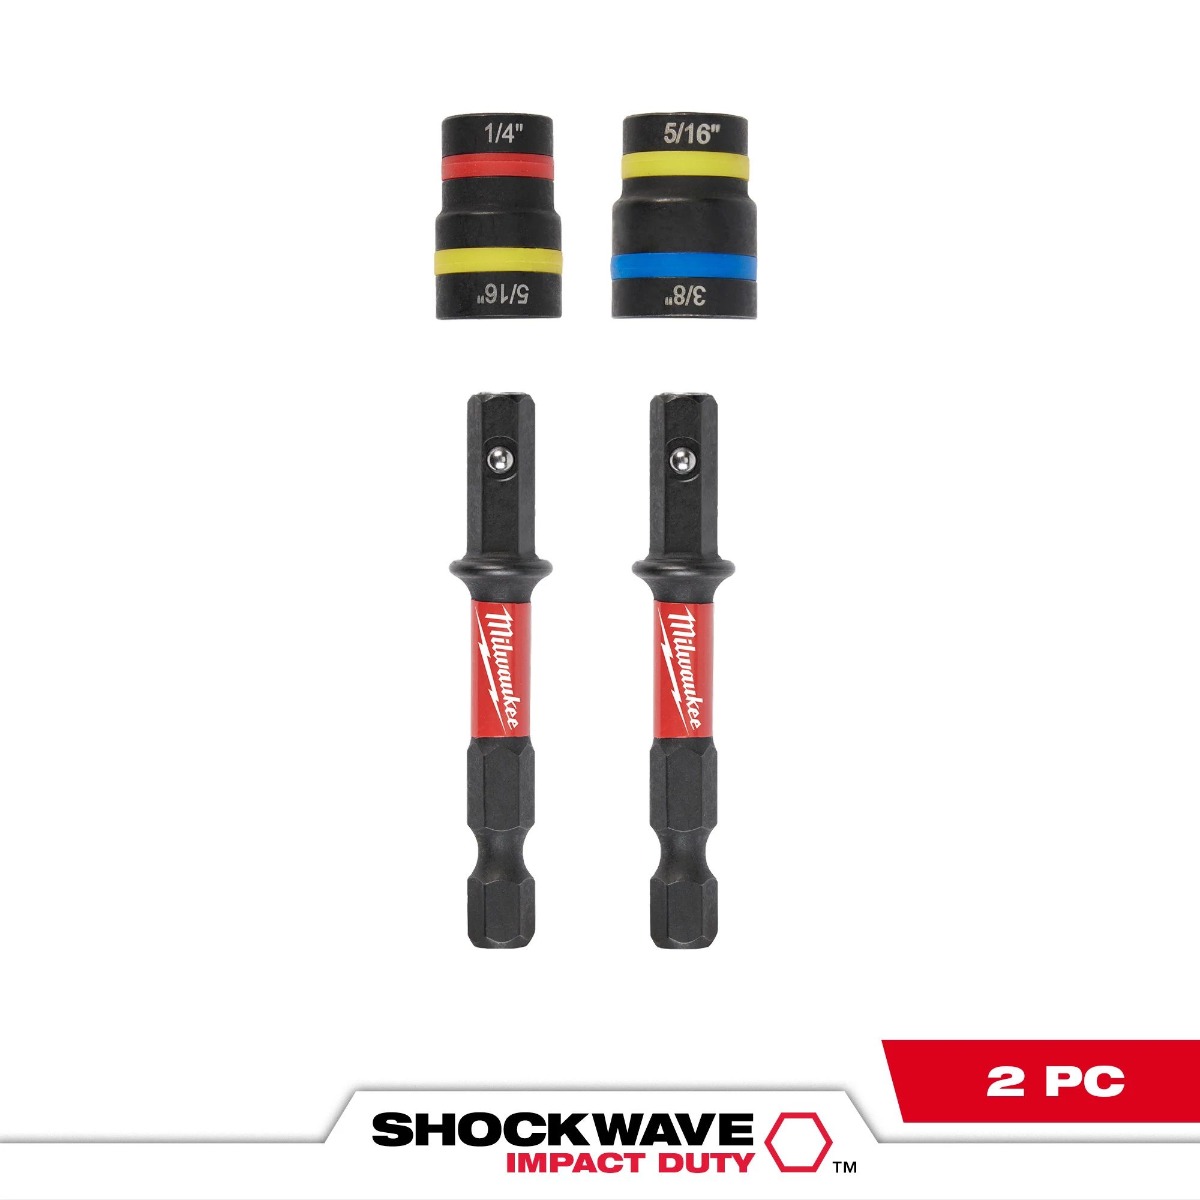 SHOCKWAVE Impact Duty™ QUIK-CLEAR™ 2-in-1 Magnetic Nut Driver Set 2PC